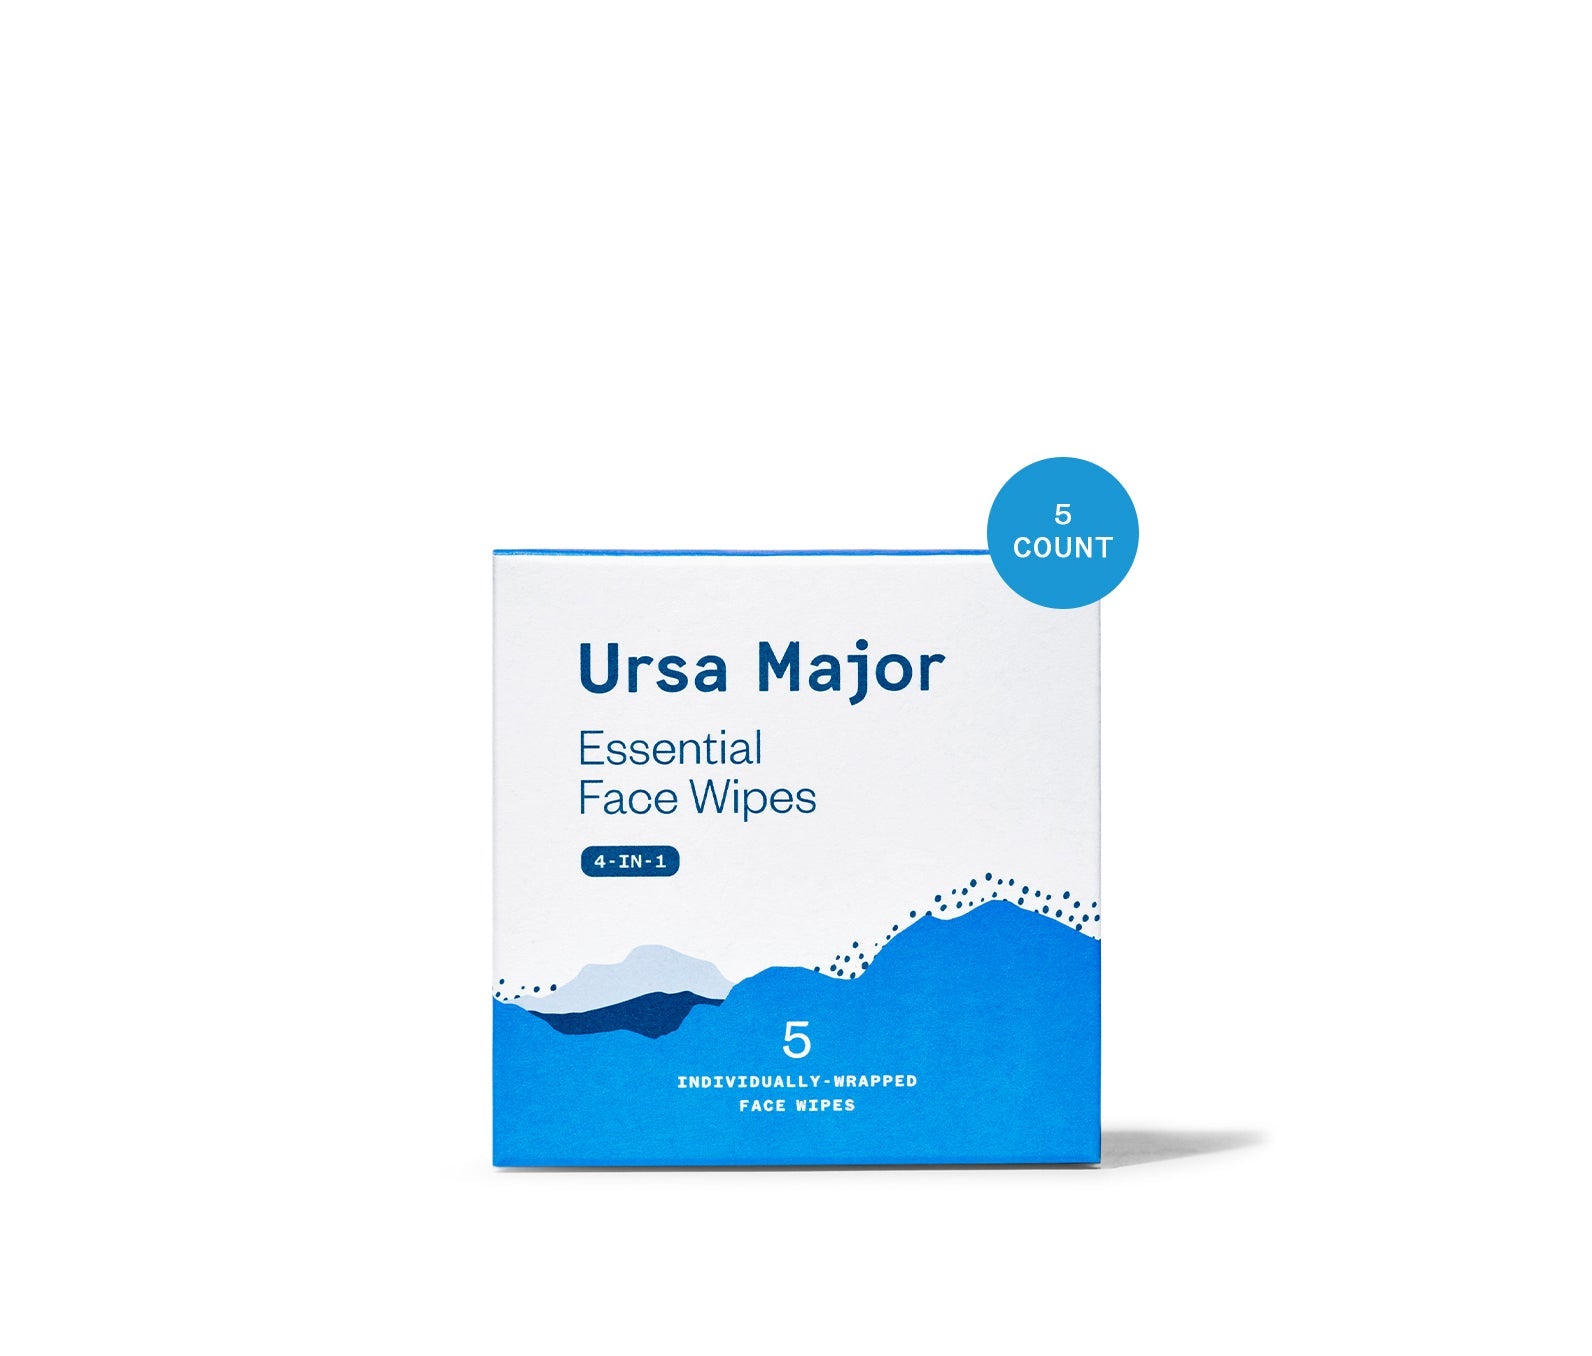 Blue and white packaging for 5 individually wrapped 4-in-1 Essential Face Wipes by Ursa Major Skincare